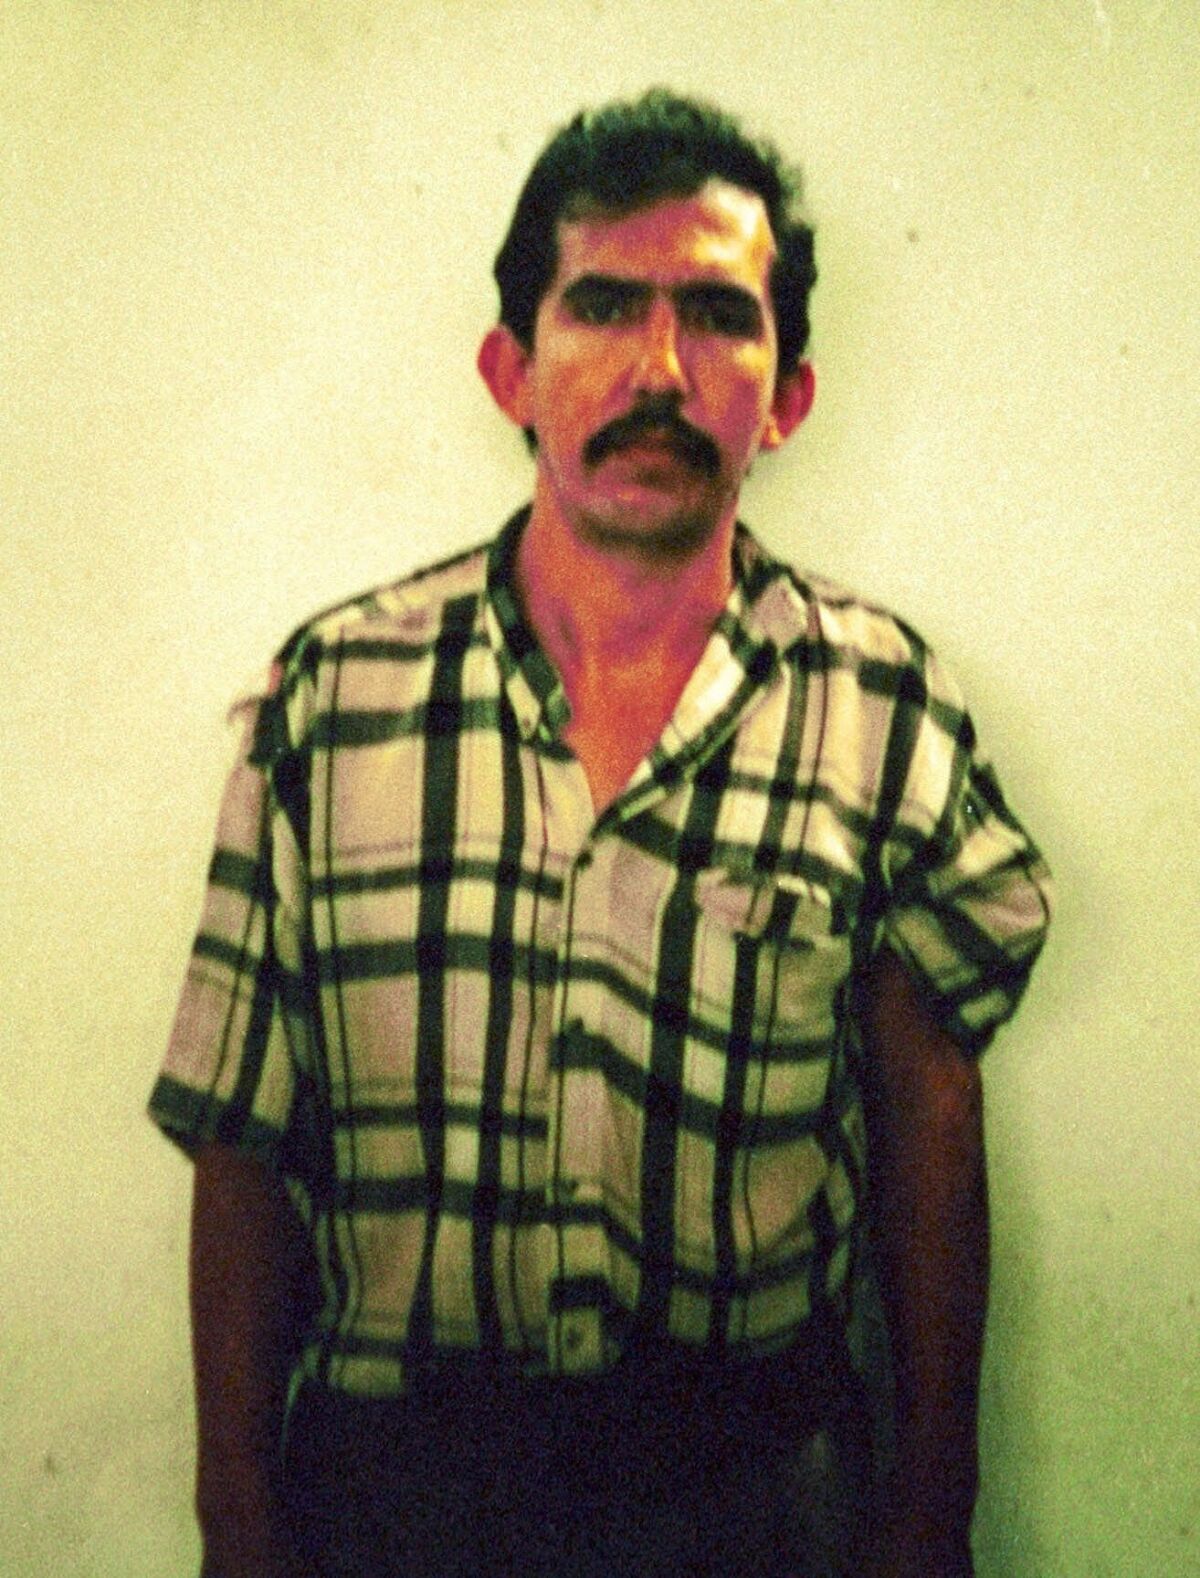 FILE - In this photo released by Colombian police, Luis Alfredo Garavito is seen in this undated police mug shot in Bogota, Colombia. A proposal to grant early release from prison to Garavito, one of the world's most prolific serial killers who confessed to killing about 190 children, has raised outrage in Colombia and a denunciation on Monday, Nov. 1, 2021 from President Iván Duque. (Colombia Police via AP, File)